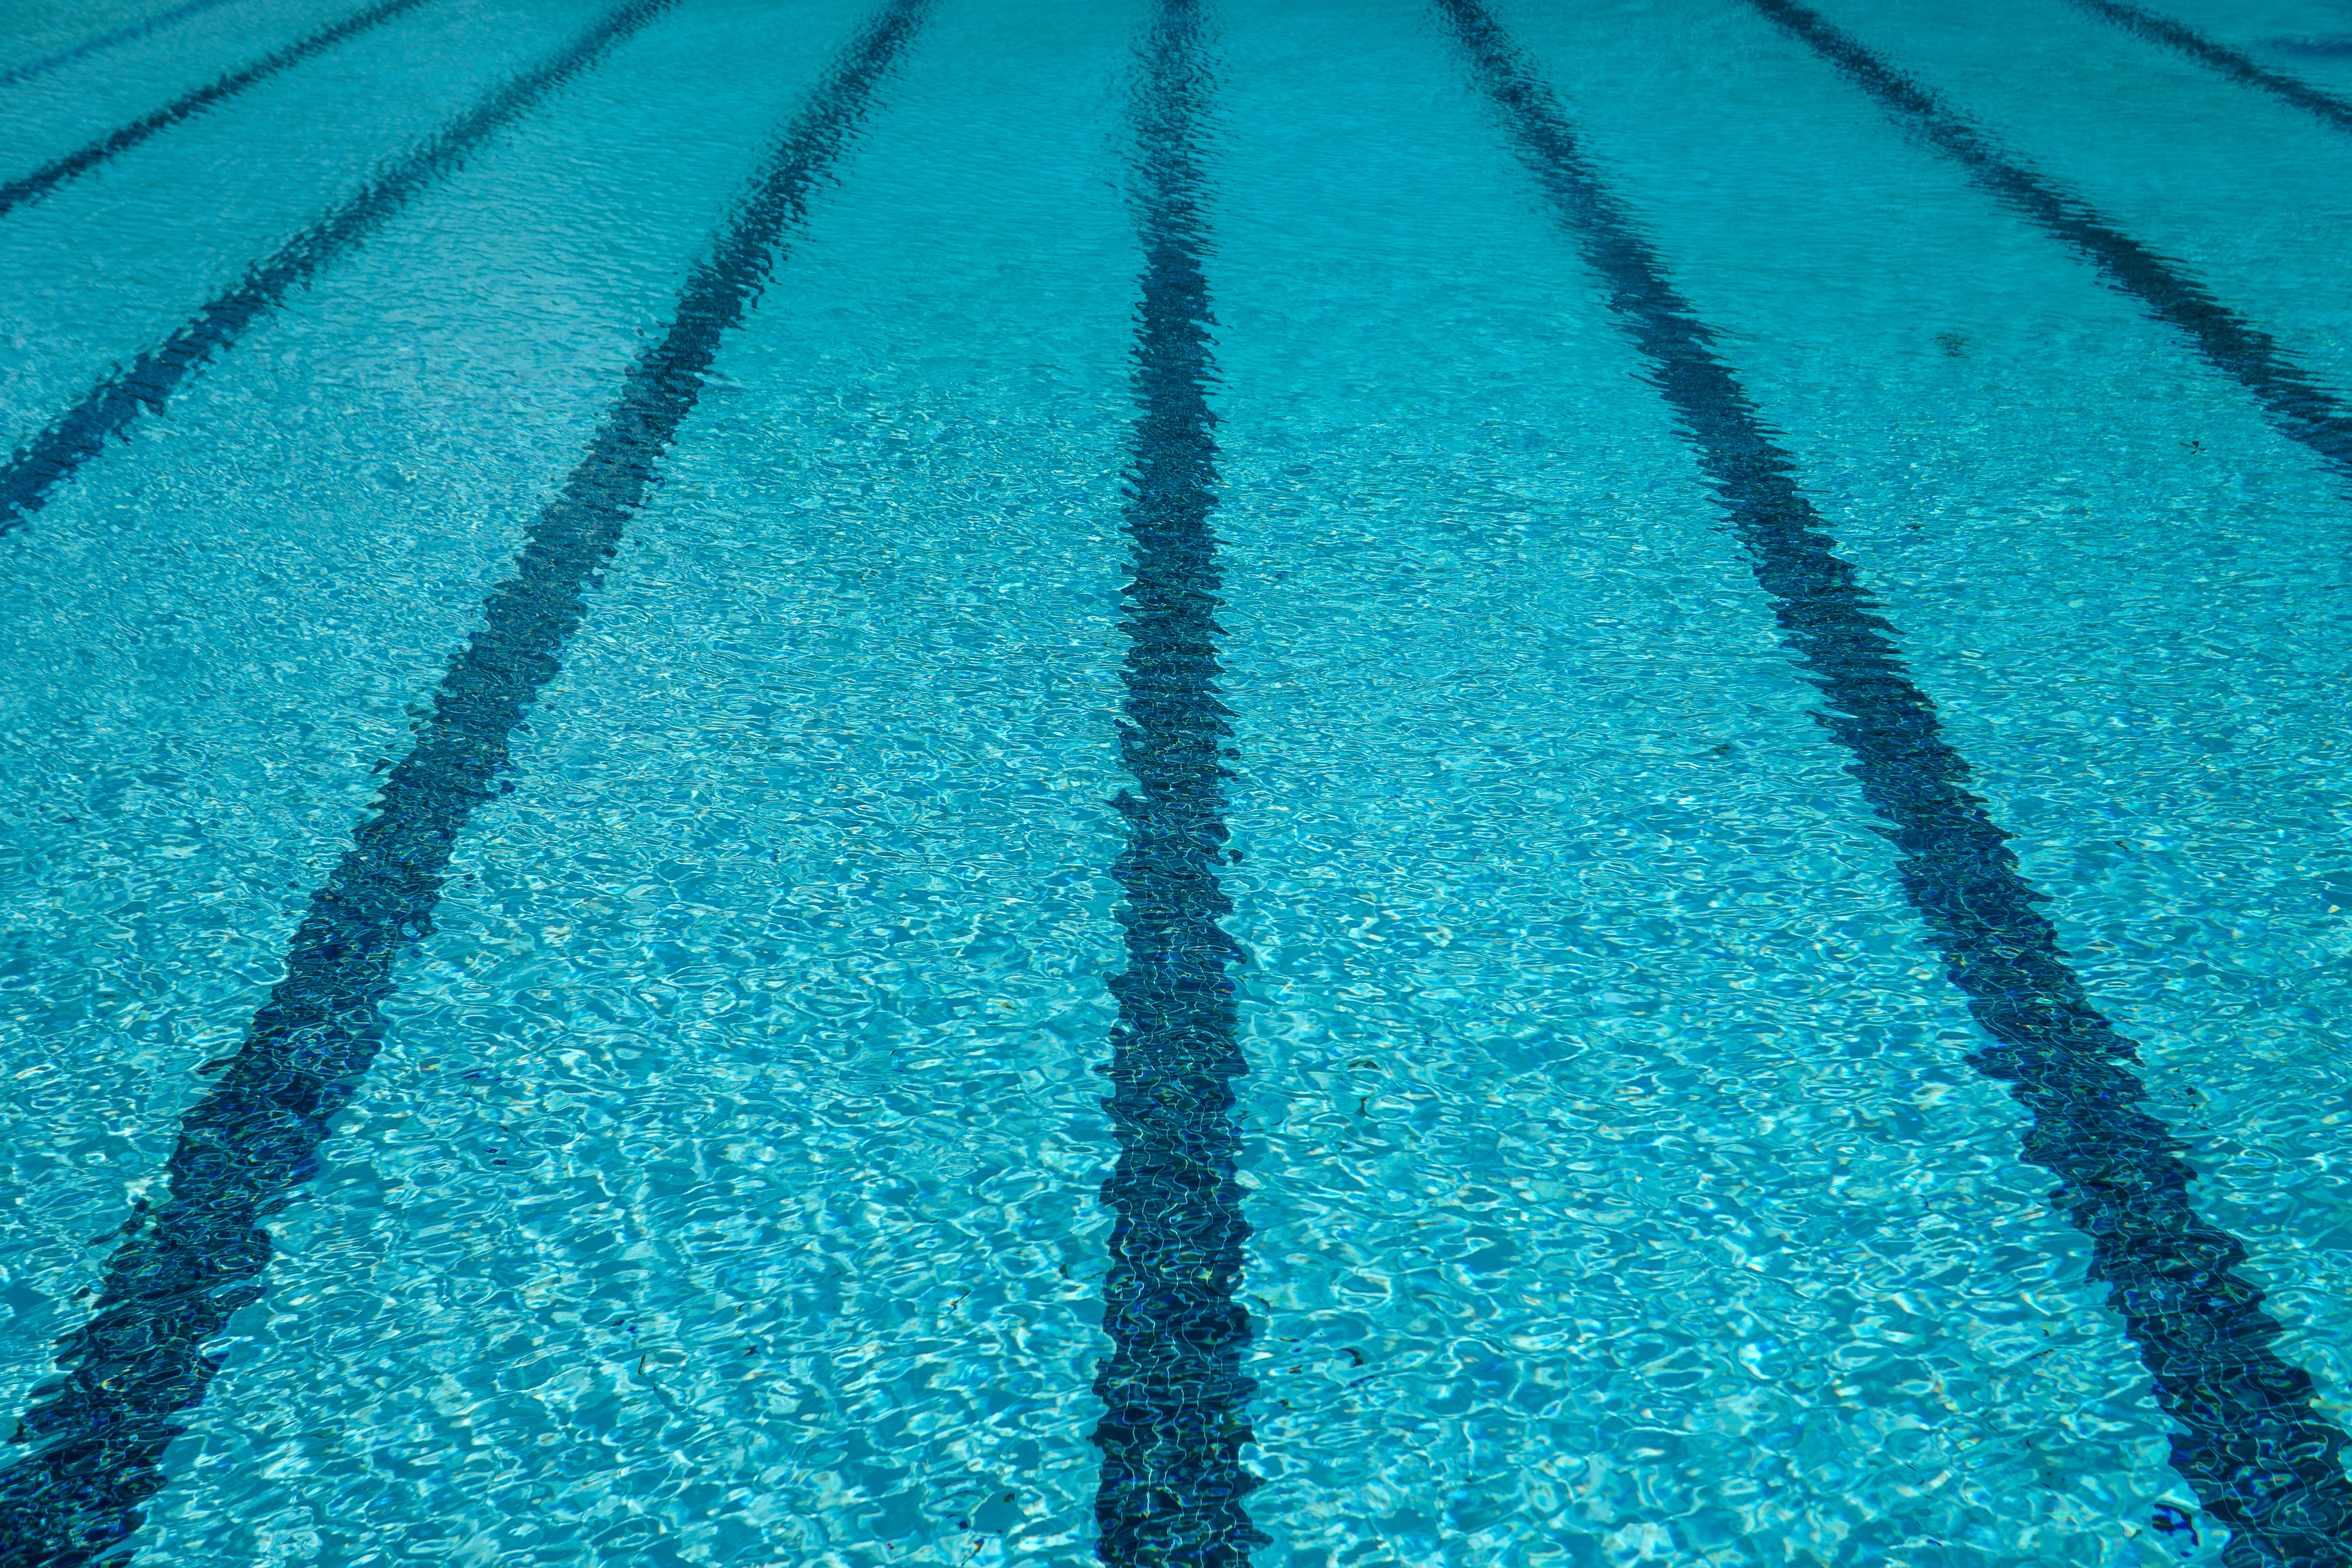 “Making Great Strides Outside the Pool: How Competitive Swimming Improved My Son’s Wellbeing”